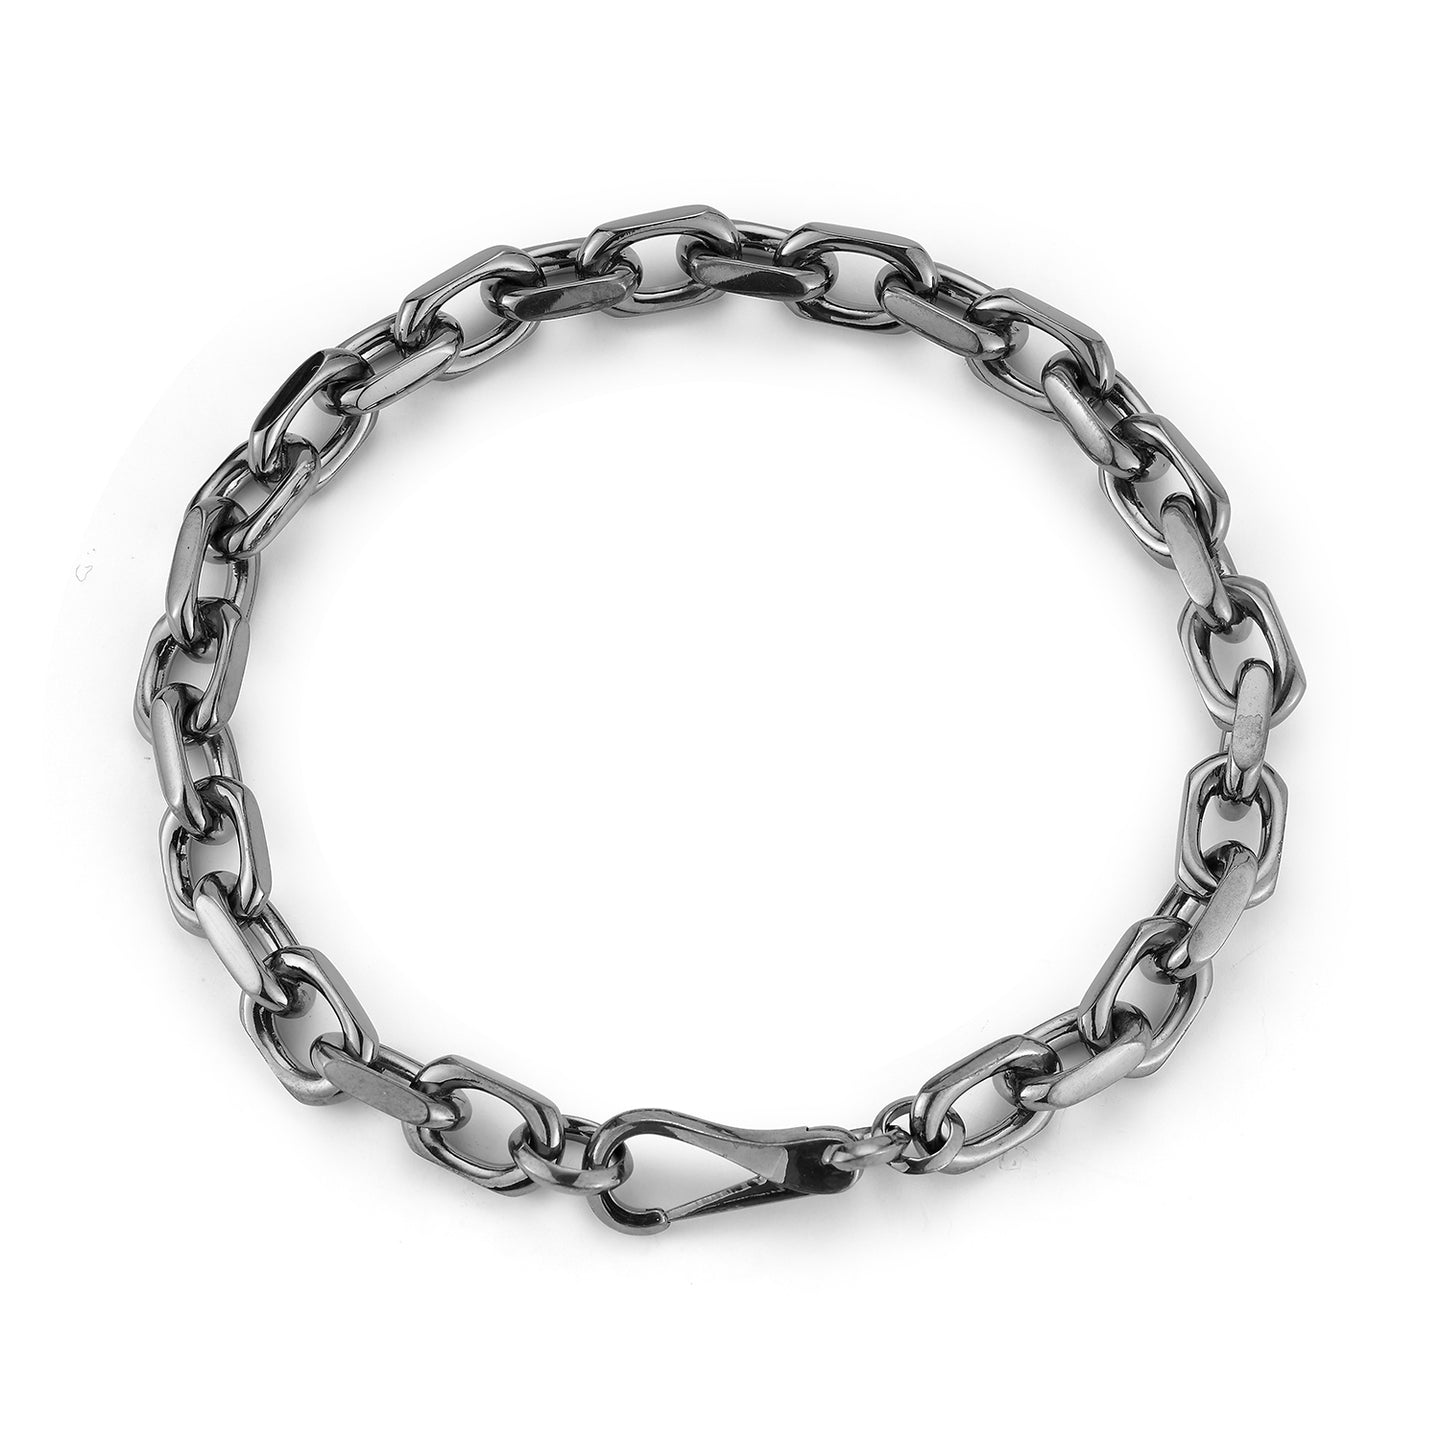 SAXON STERLING SILVER, BLACK RHODIUM CABLE CHAIN LINK BRACELET WITH SPRING CLASP